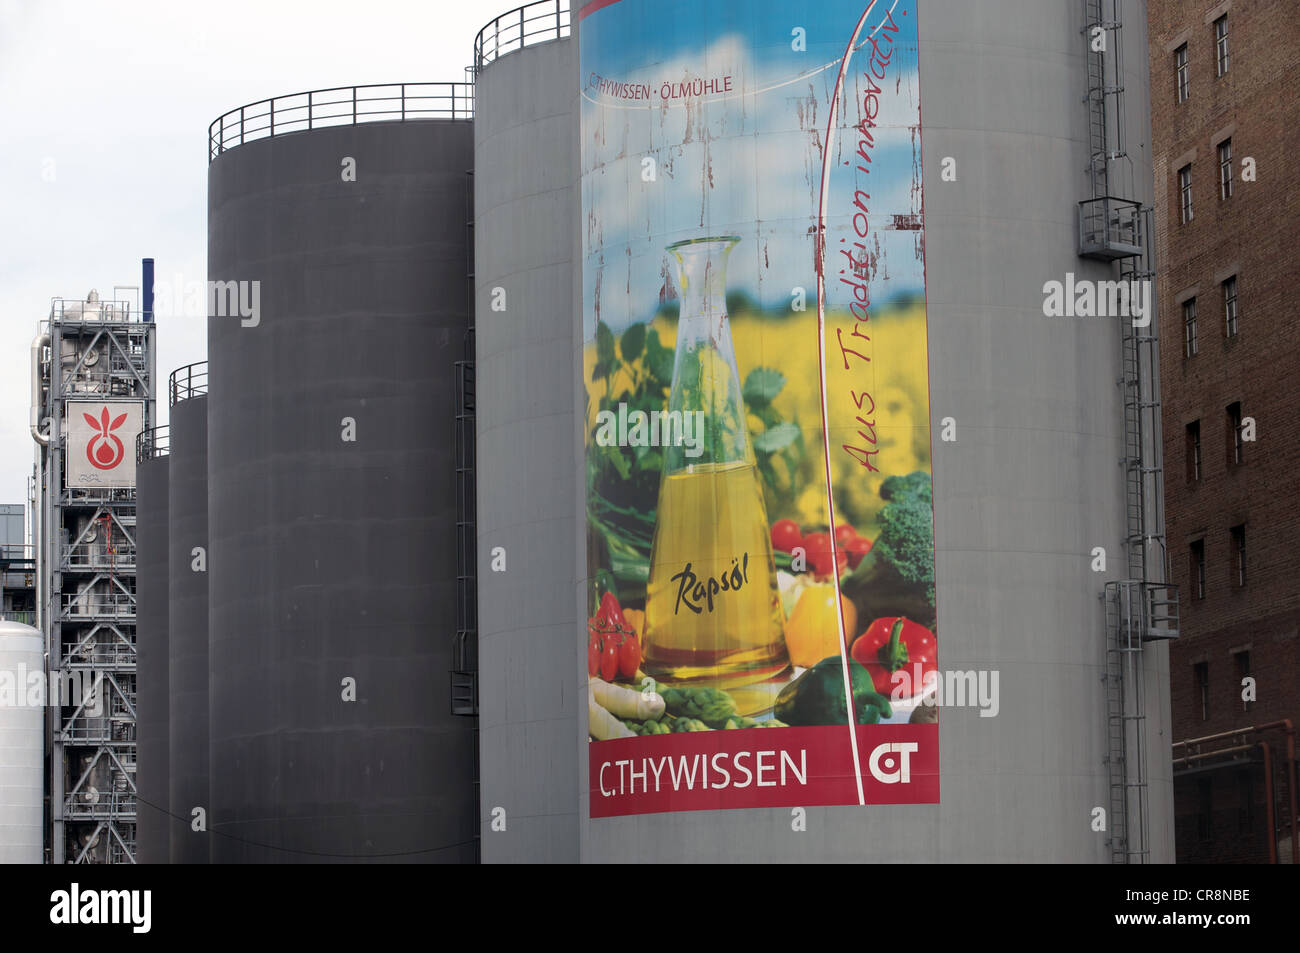 C.Thywissen, a manufacturer of vegetable oils, animal feeds and biodiesel, Neuss, Germany. Stock Photo